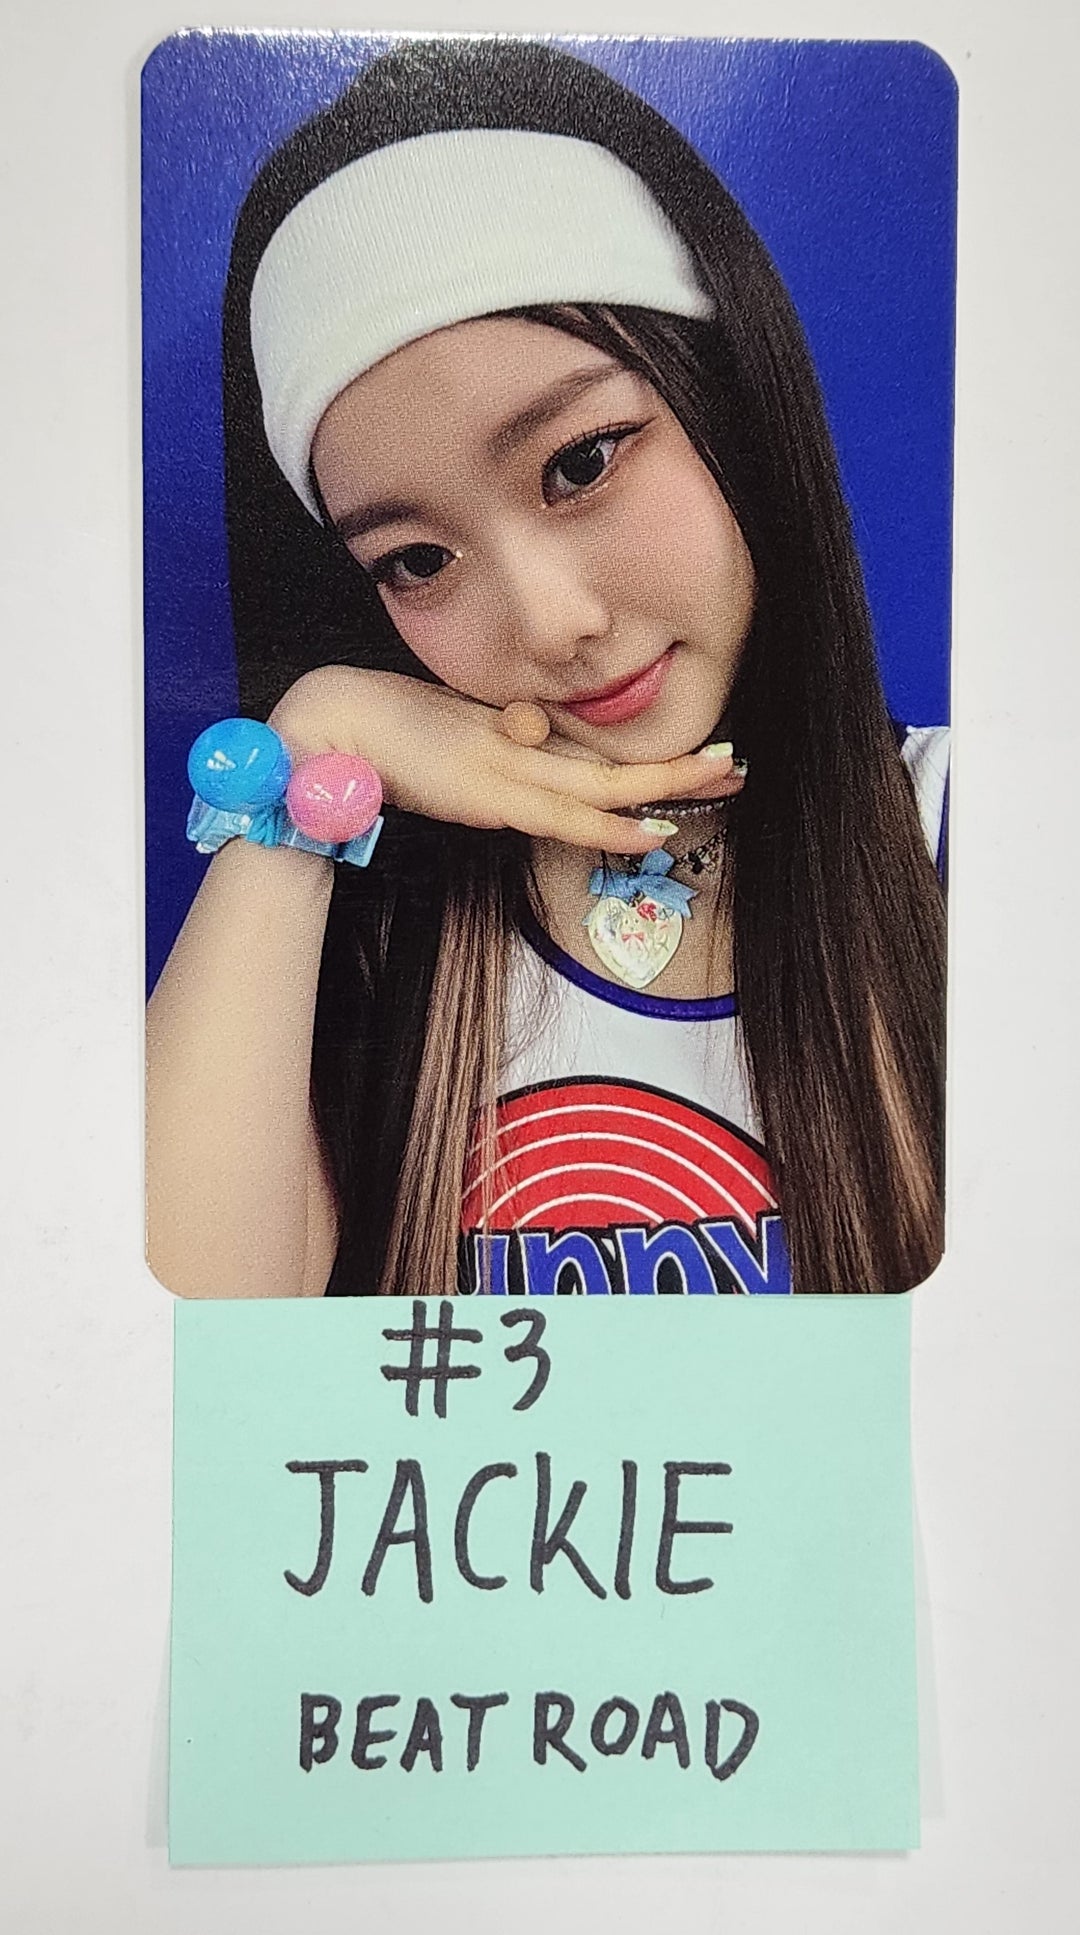 ICHILLIN' "I'M ON IT!" - Beatroad Fansign Event Photocard [23.08.28]